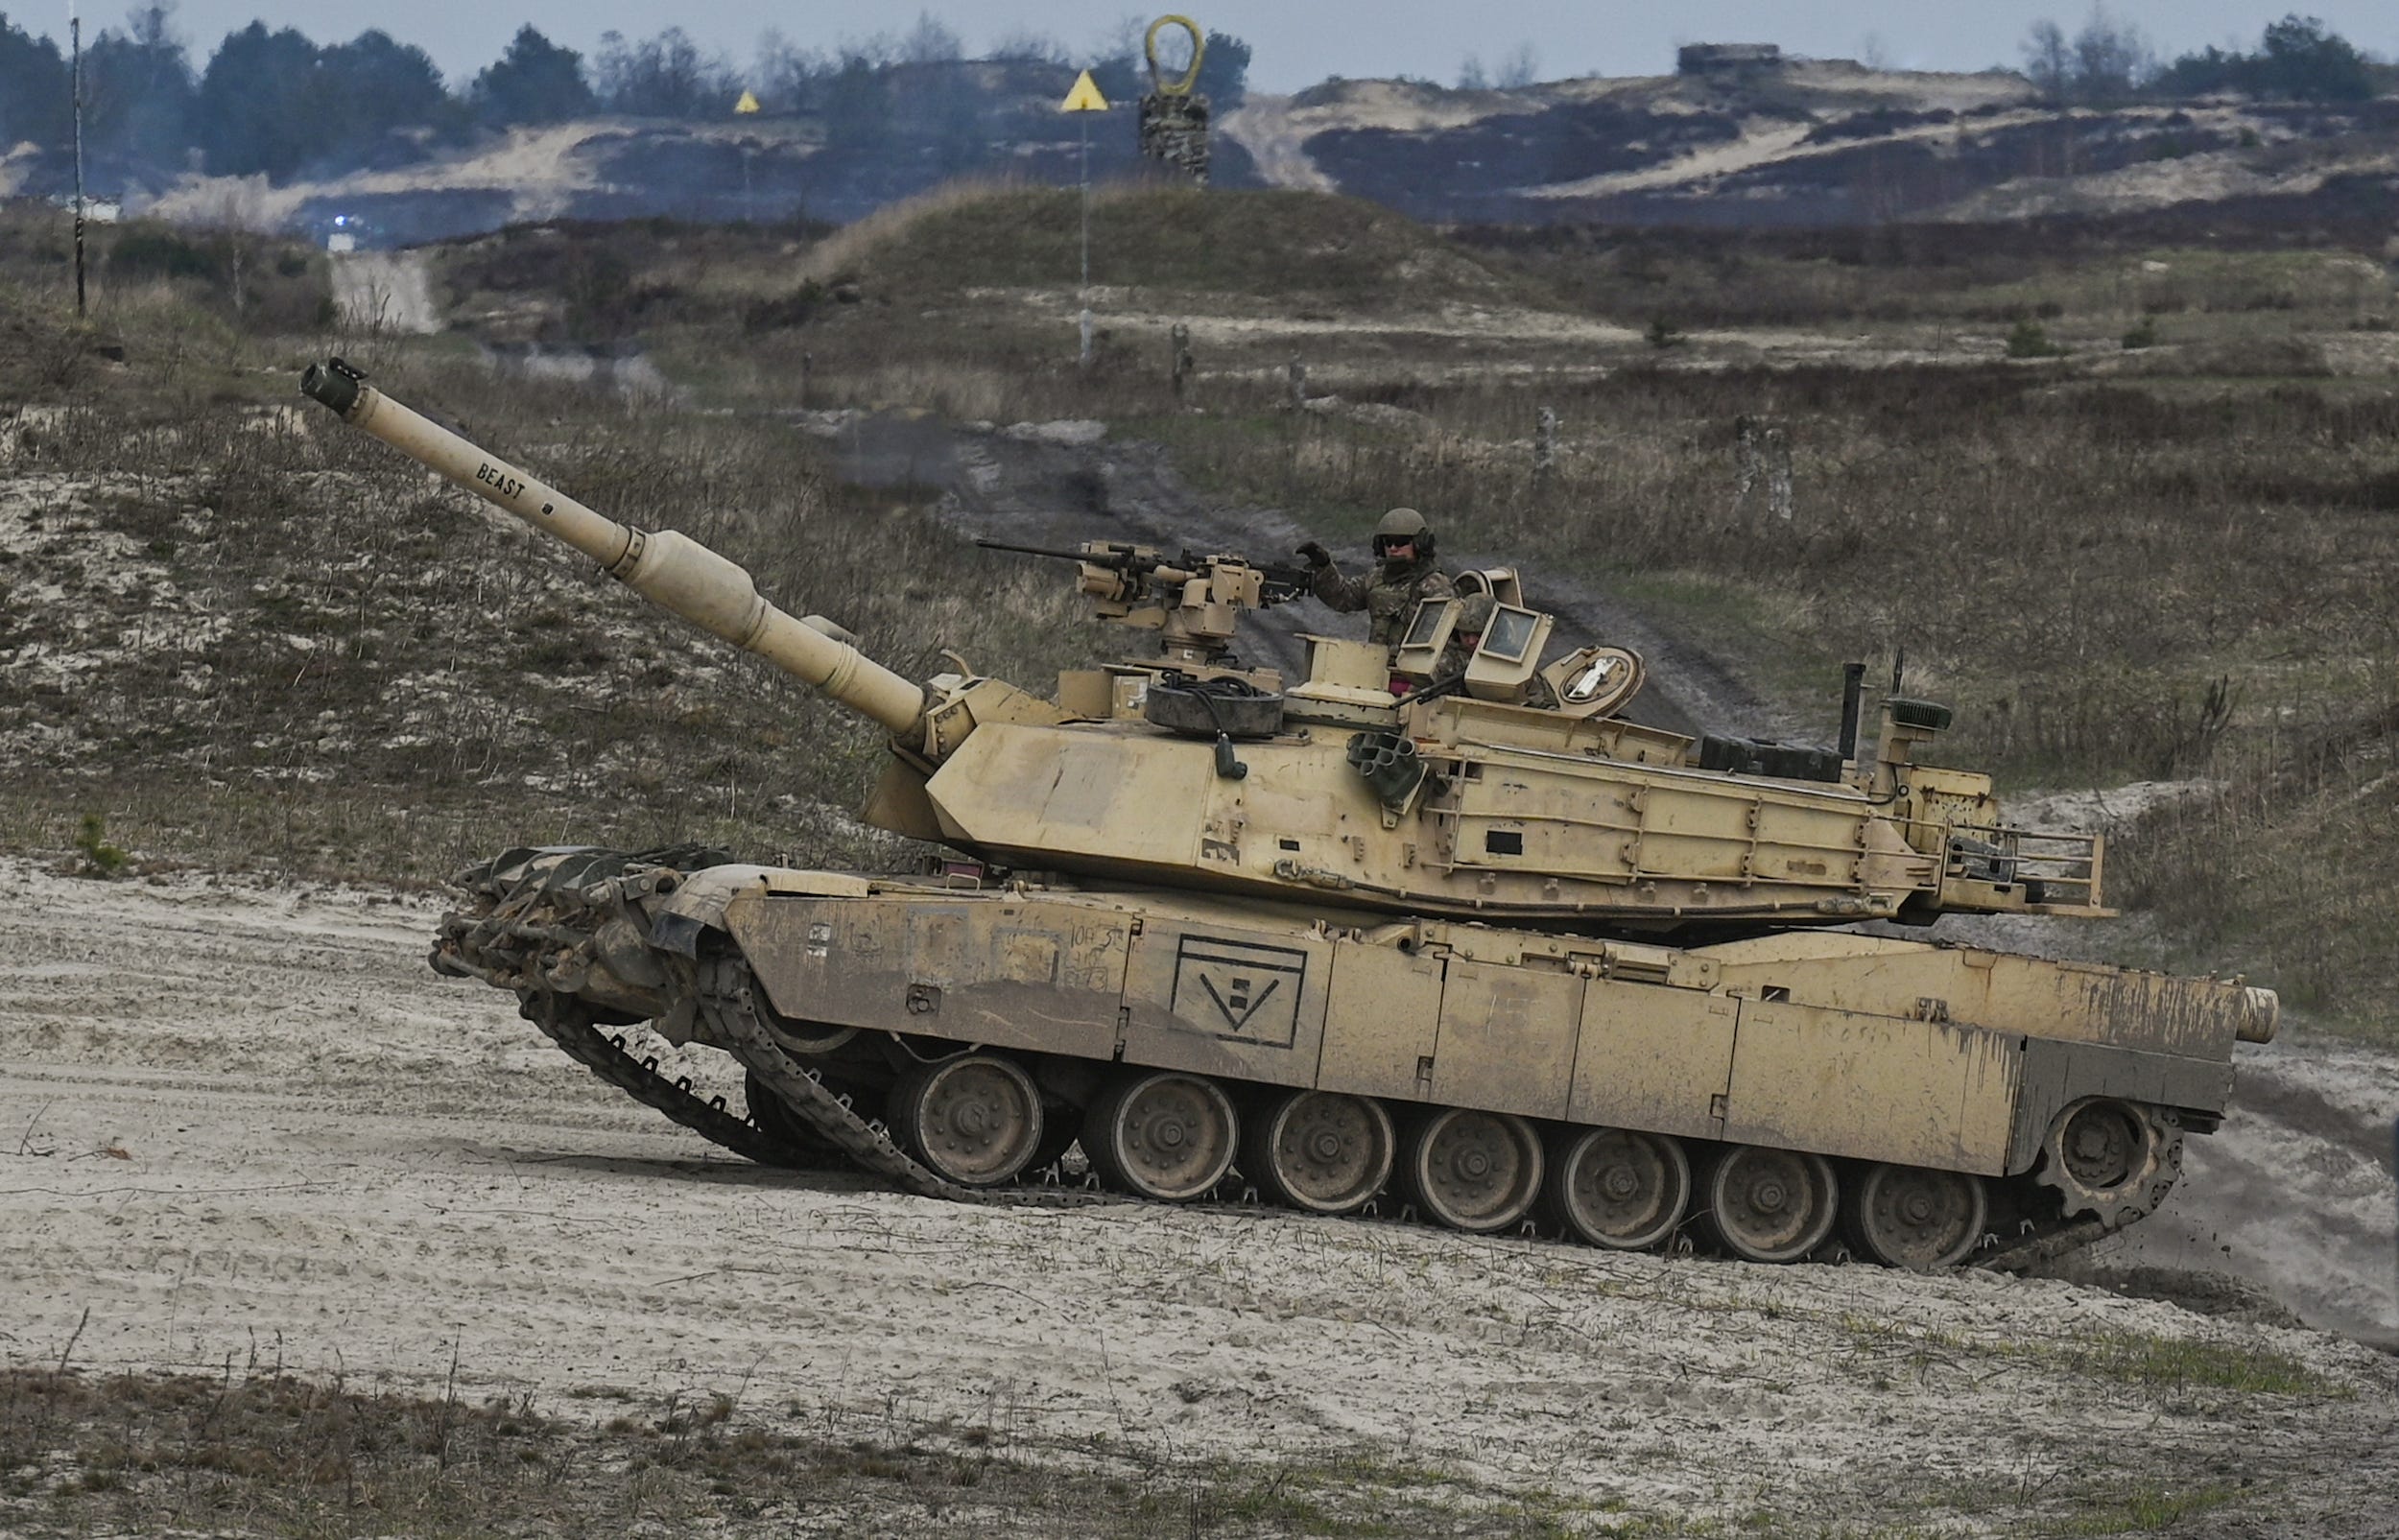 microsoft, a ukrainian tank crew says the abrams is still being used on the front lines, but isn't finding 'tank-on-tank' battles where it has the edge